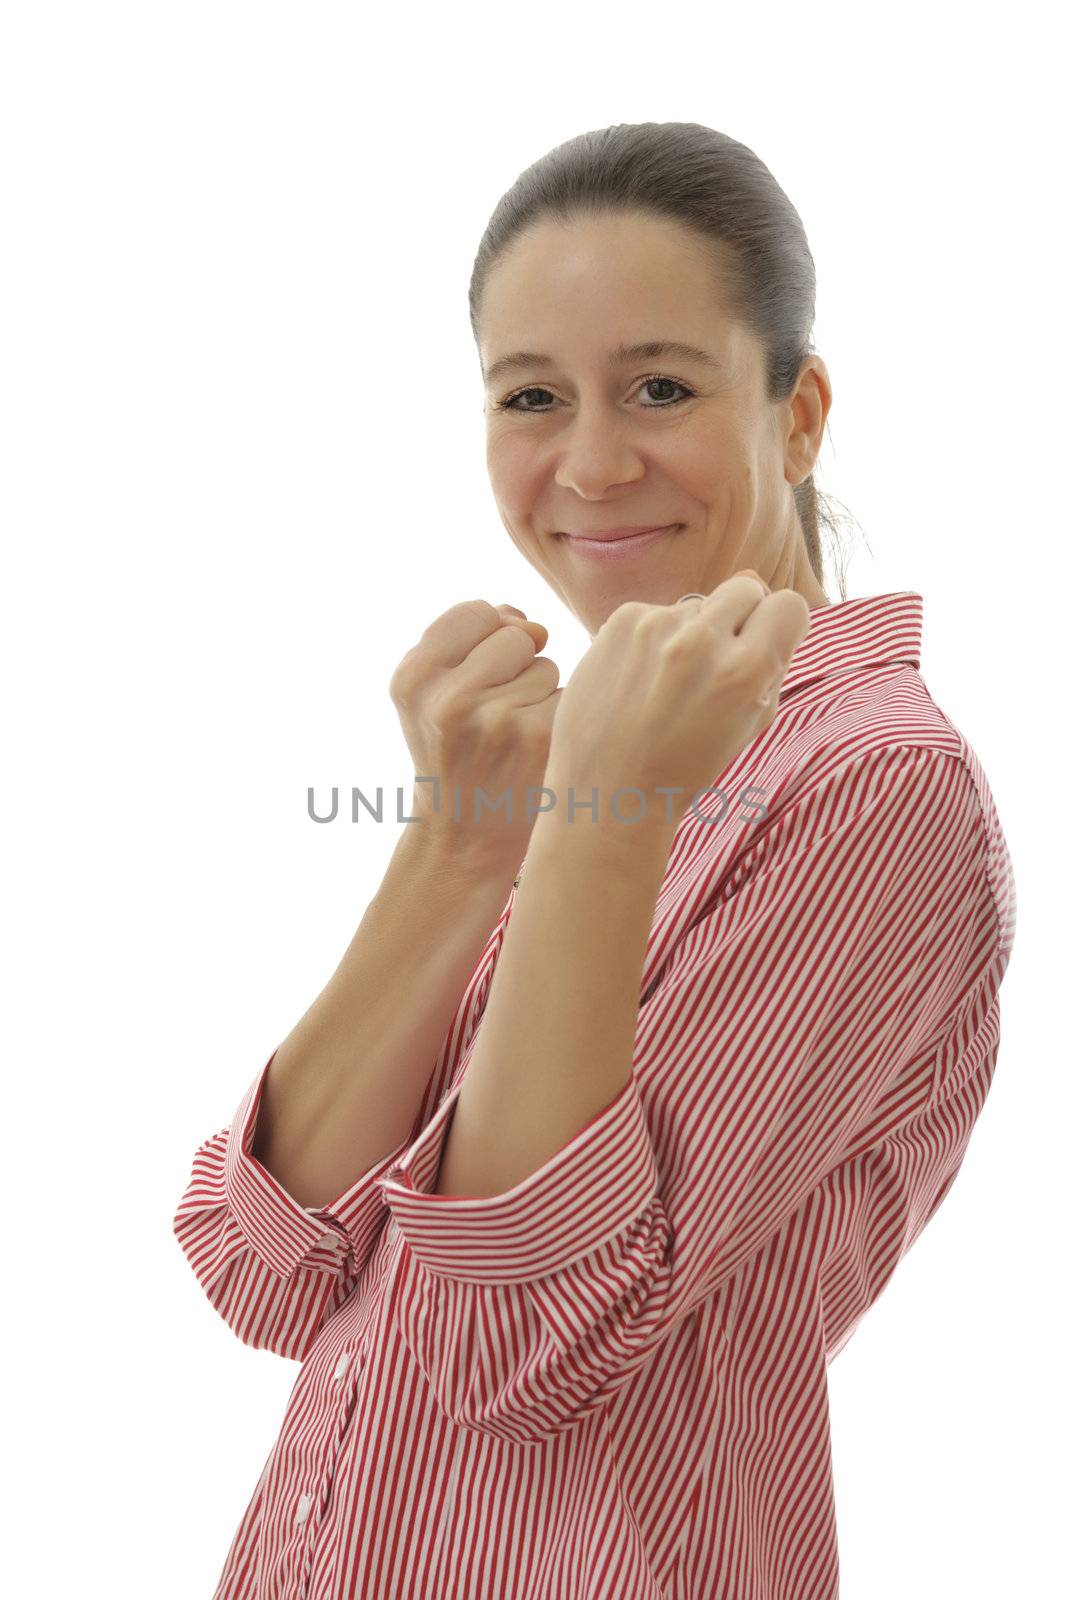 Smiling attractive business woman with a red shirt holding up arms in a fist on a white background